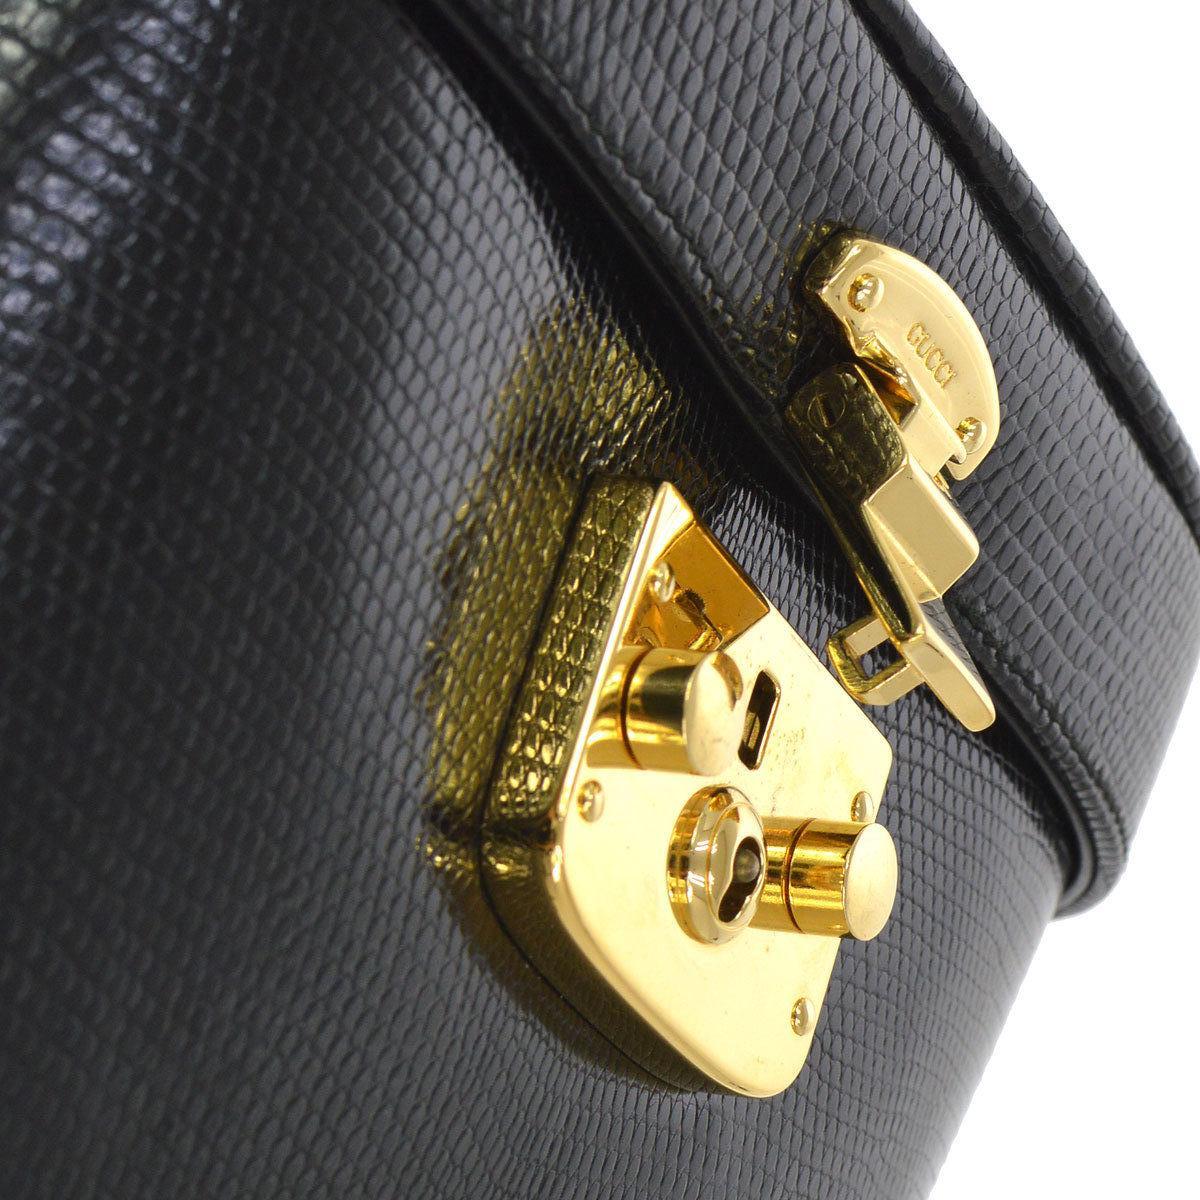 Gucci Black Lizard Leather Top Handle Satchel Vanity Style Mini Small Bag

Lizard
Gold tone hardware
Key lock closure
Leather lining
Made in Italy
Handle drop 4.25